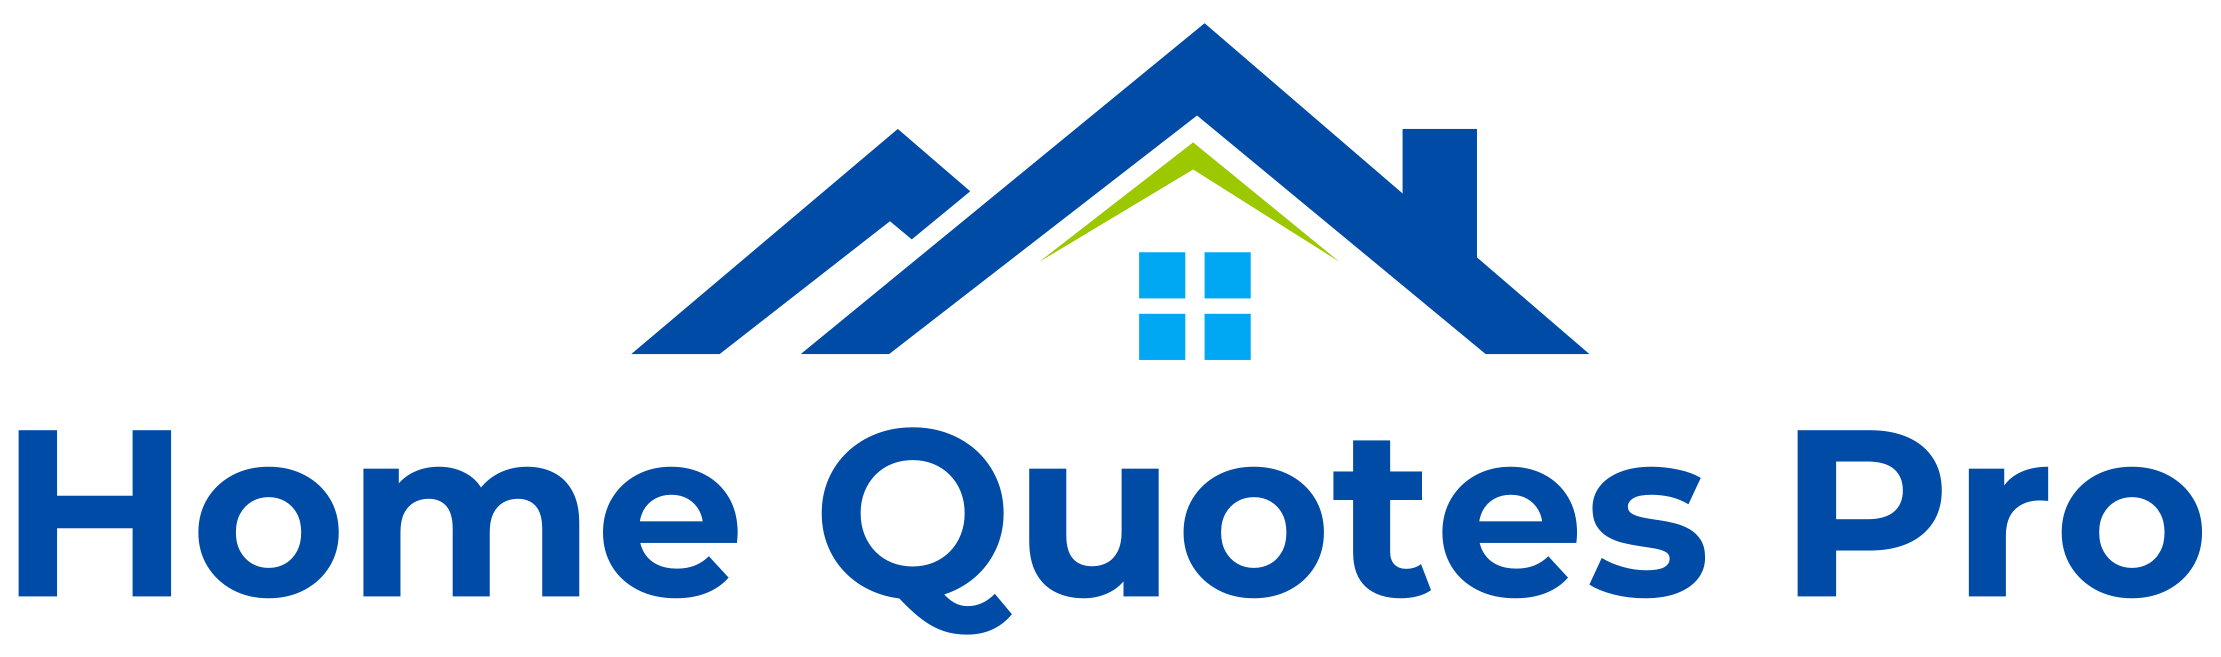 Home Quotes Pro